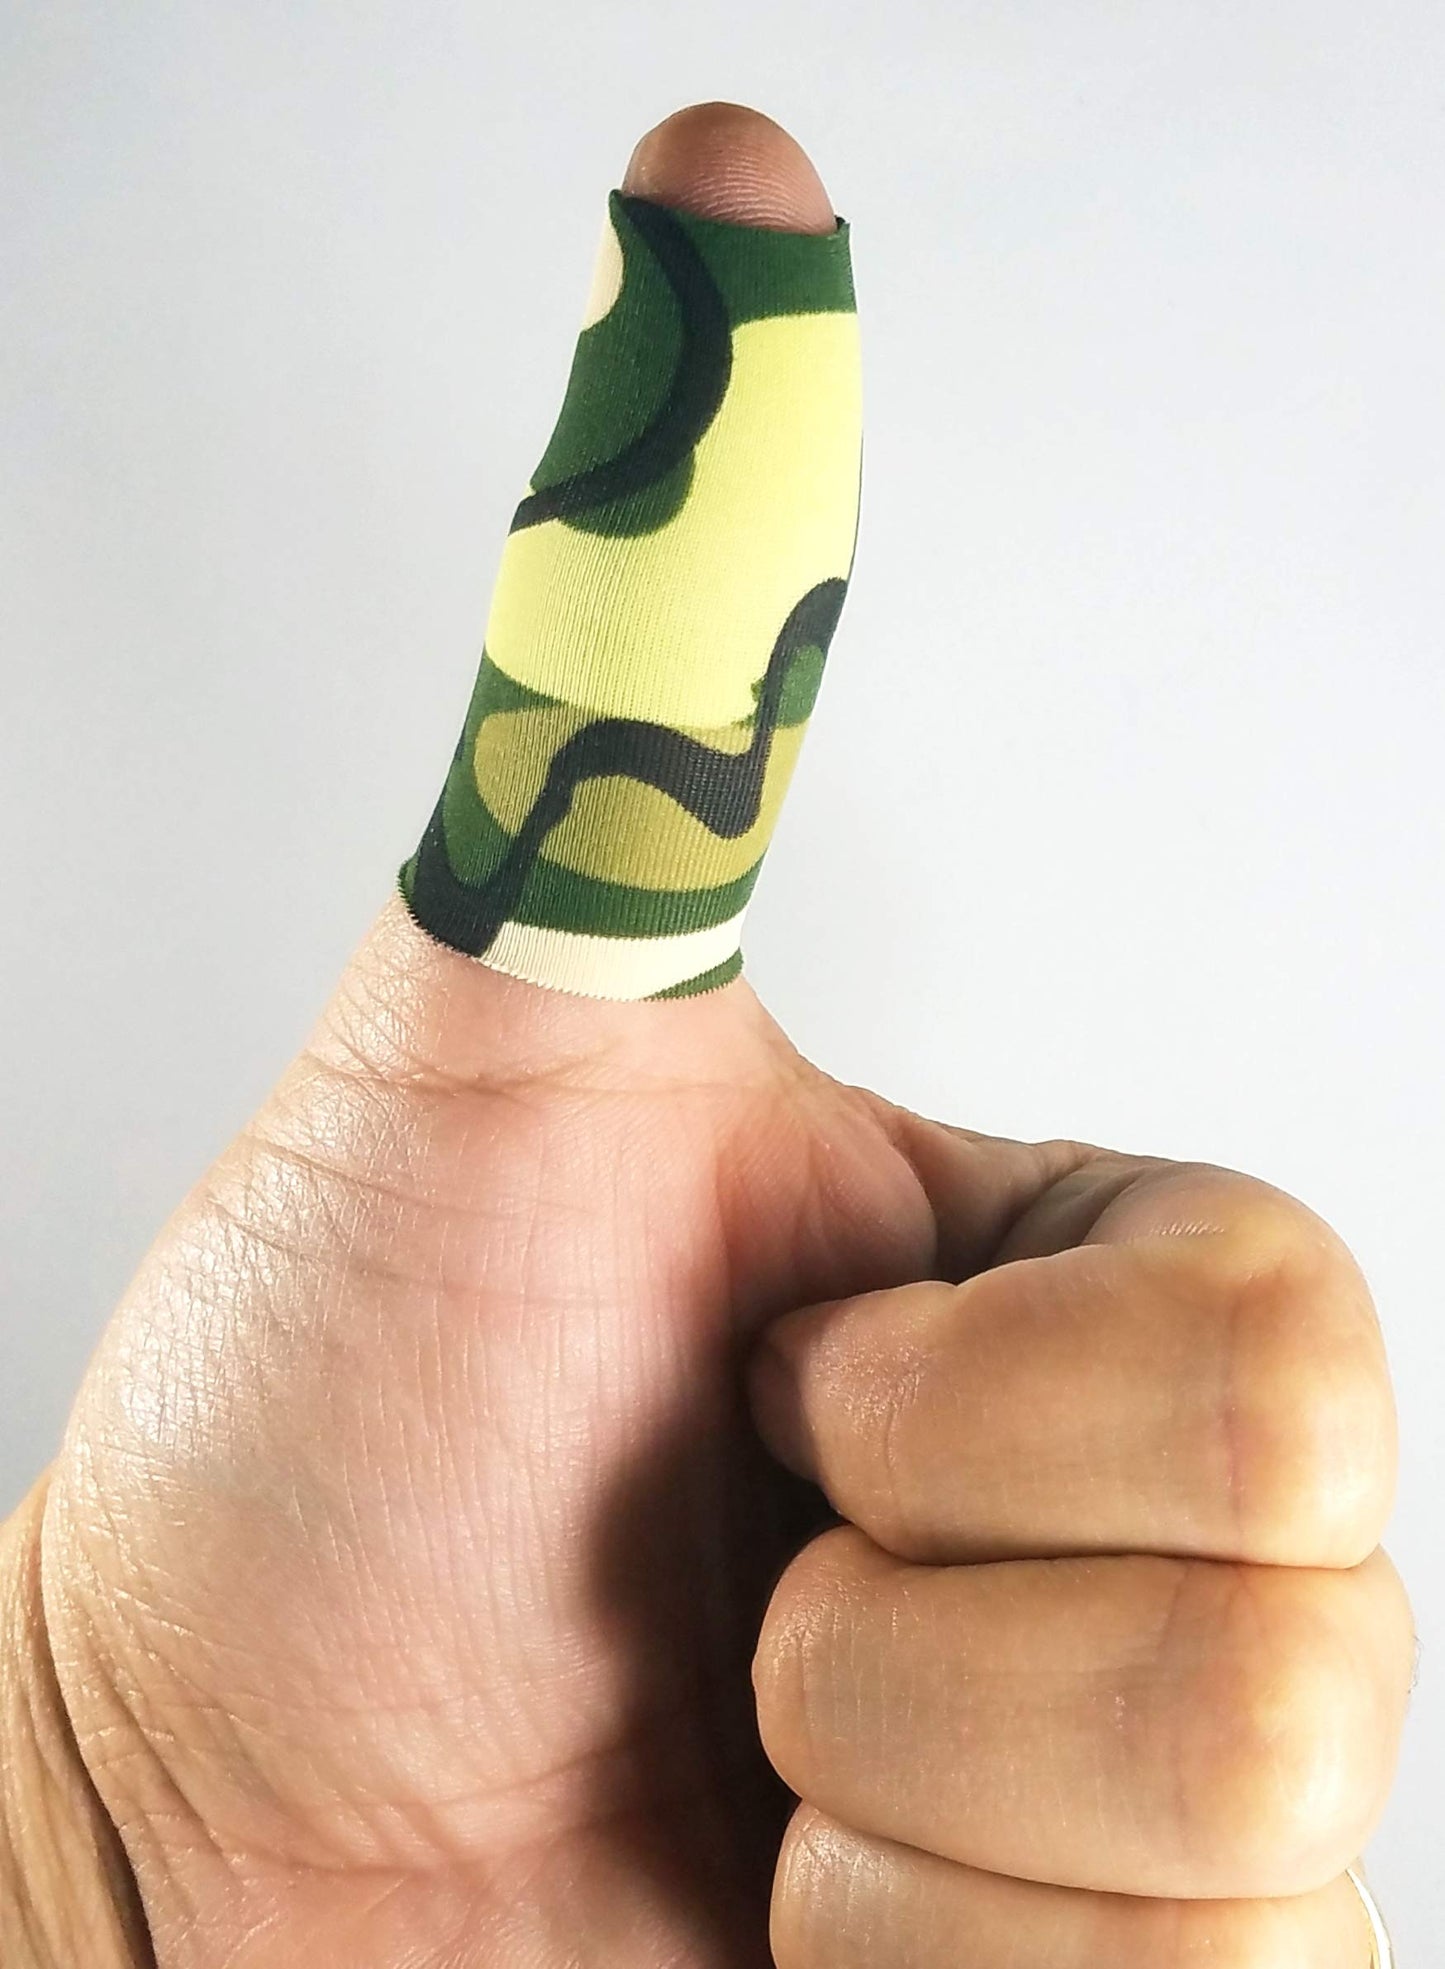 Bowling Thumb Sock - from The Makers of The Original Thumb Sock